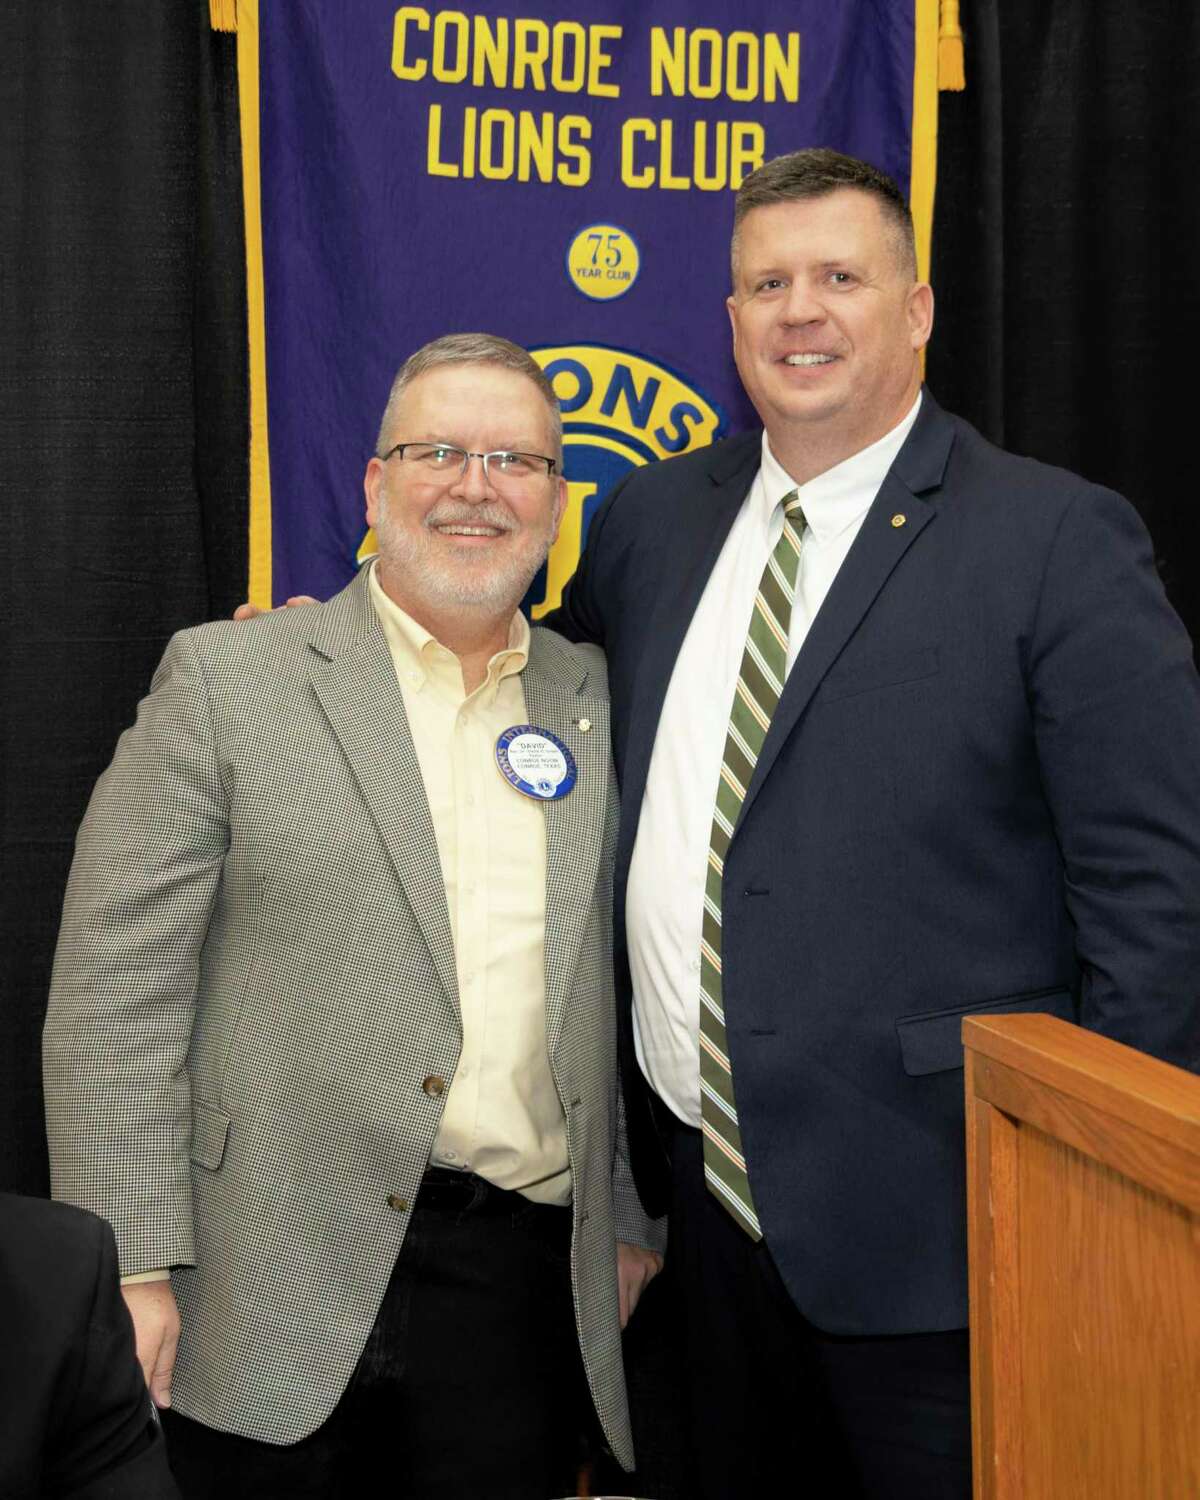 Conroe Noon Lions Club member Rev. Dr. David Green (left) with the First Presbyterian Church presented an inspiring talk on ‘Choosing to Win in 2023’. He was thanked by Club President Warner Phelps (right) for starting off the first meeting of the new year in the right direction.